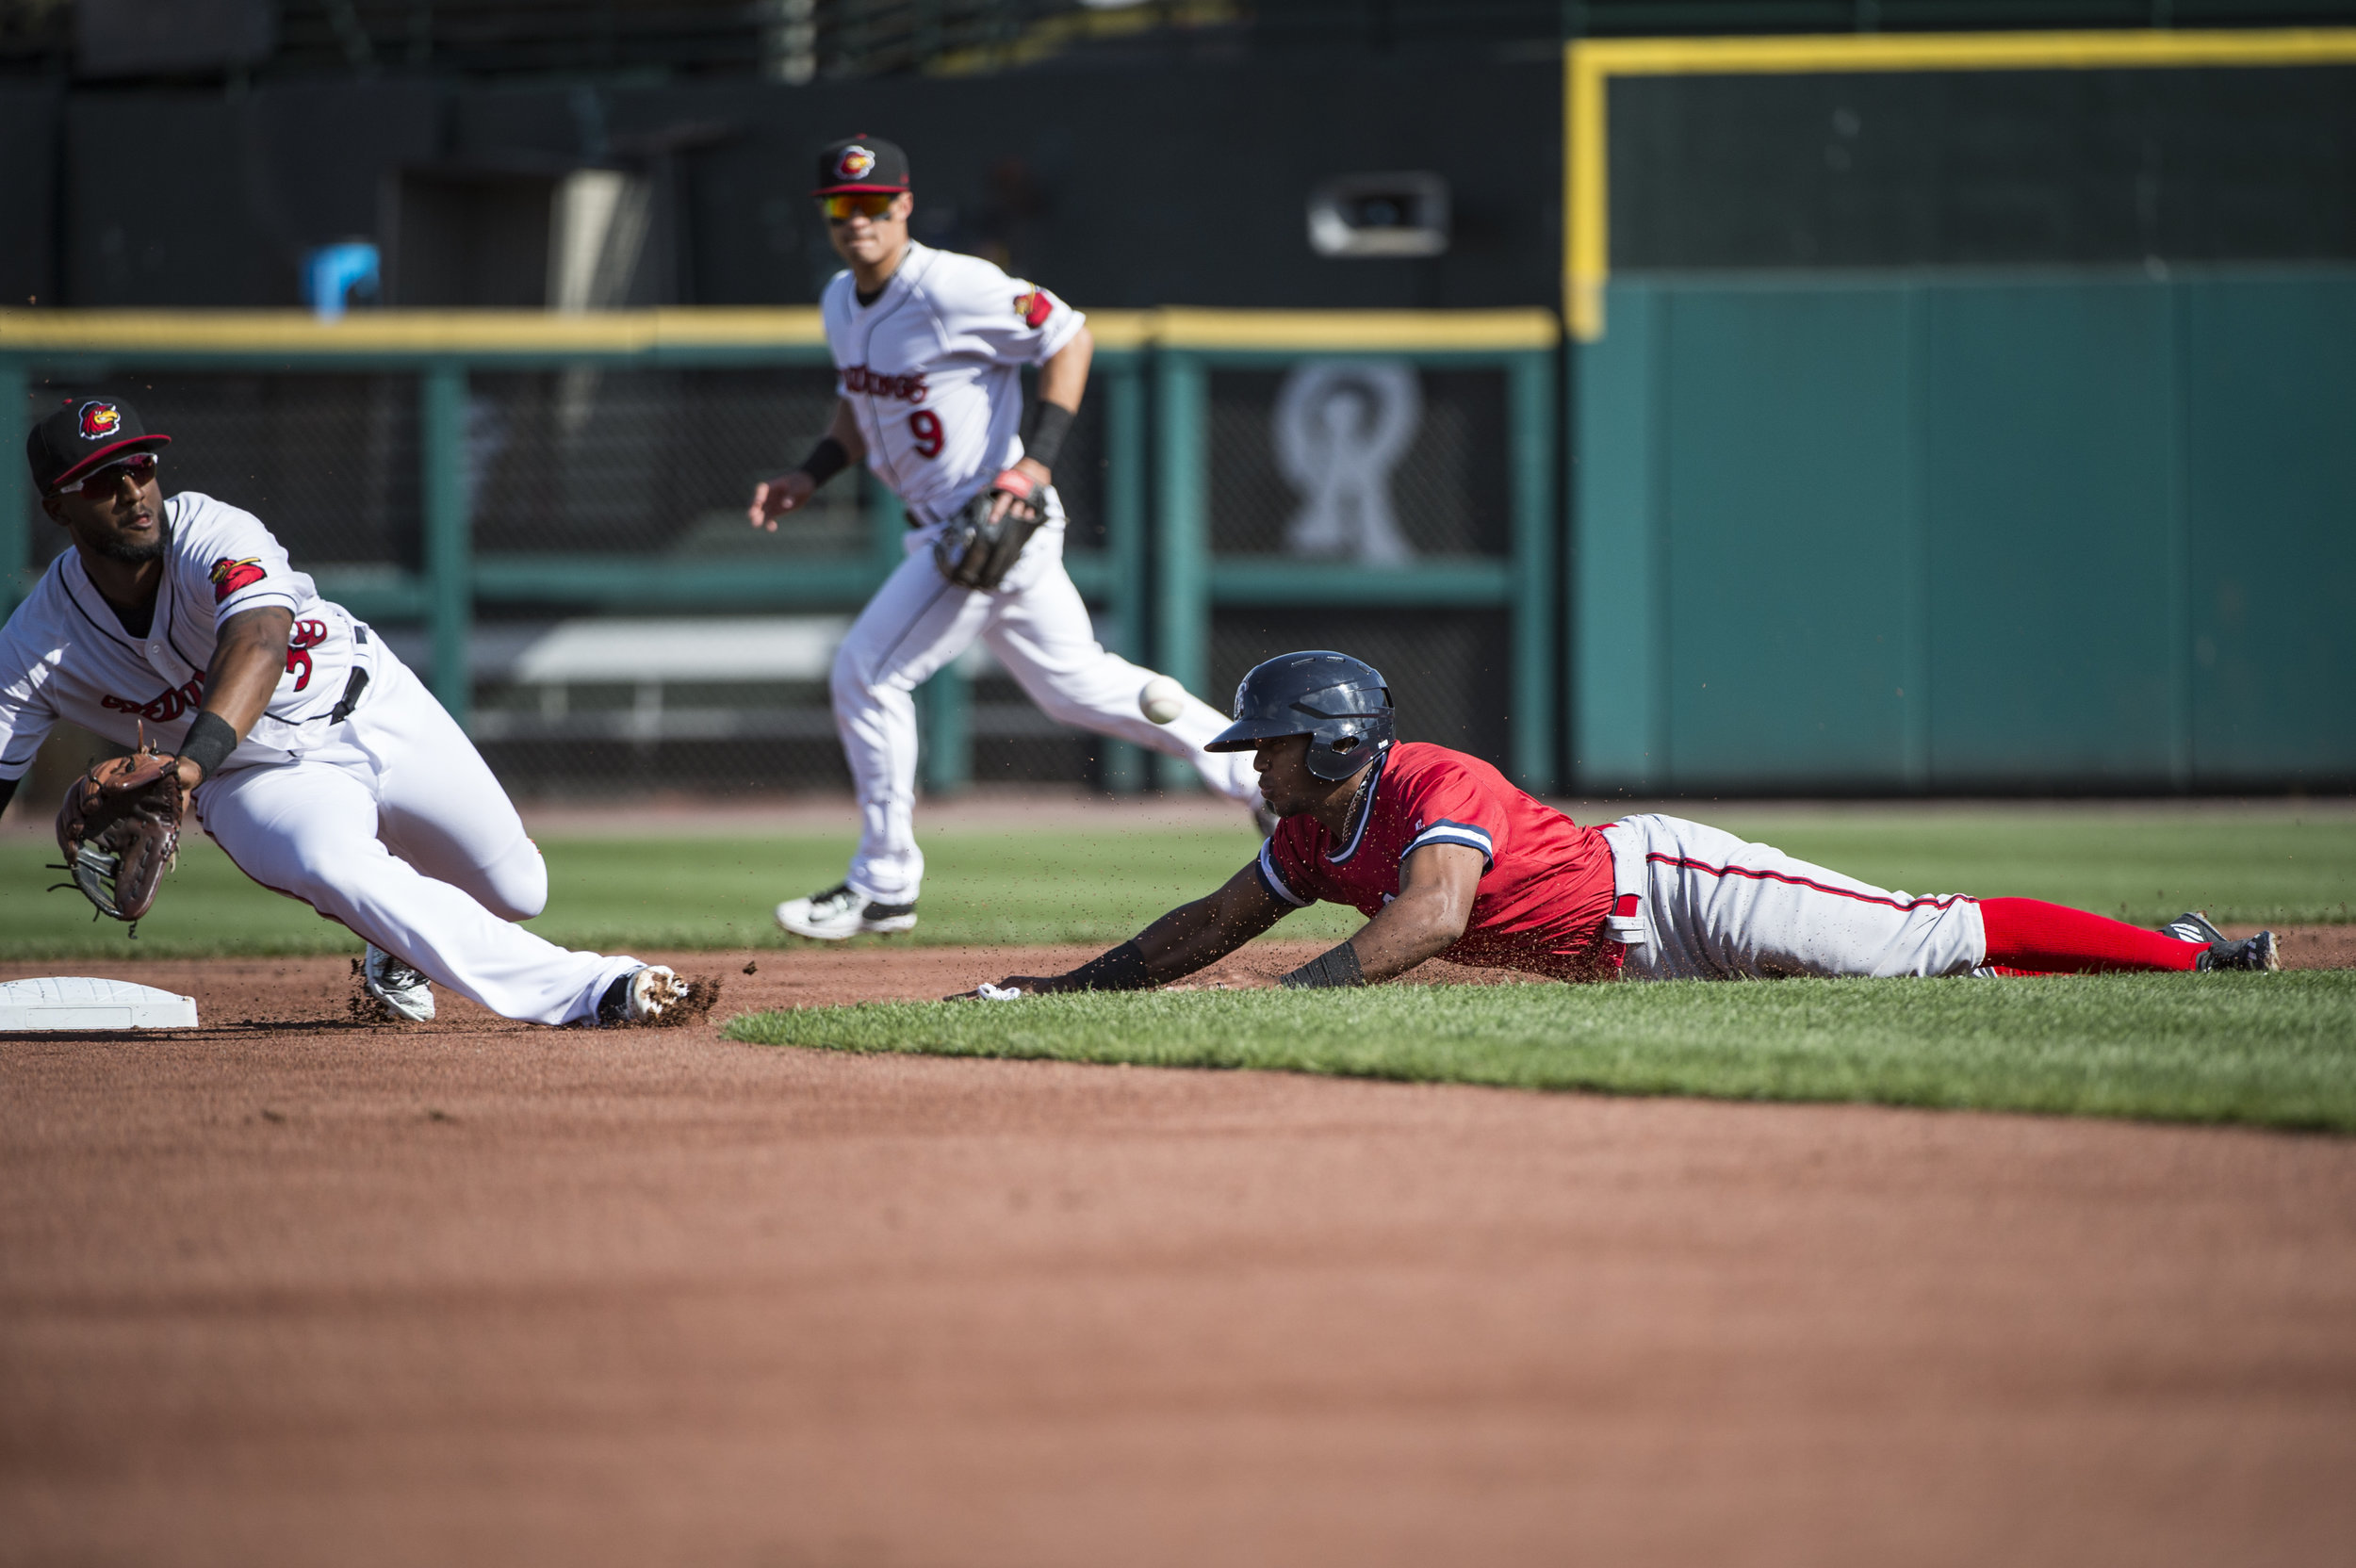  Rafael Bautista steals a base during a Chiefs game against the Rochester Red Wings at Rochester on April 16th, 2017. Bautista is known for his speed. Before getting called up to the Nationals, he led the Chiefs with 3 stolen bases. Last year in Doub